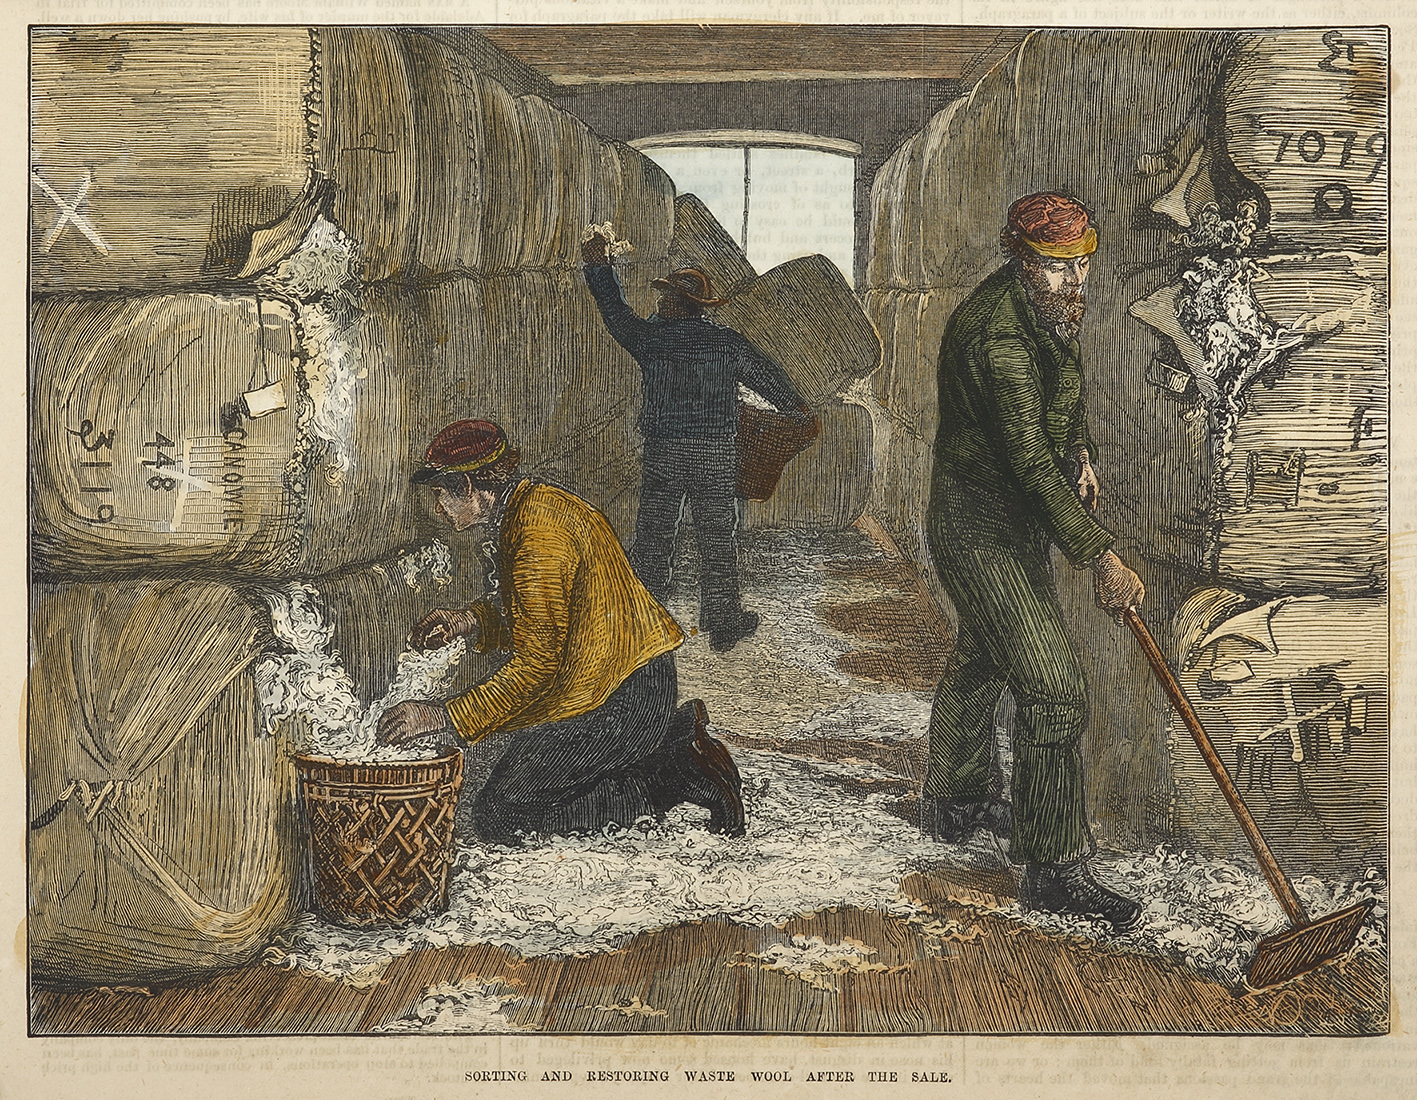 Sorting and Restoring Waste Wool After the Sale. - Antique Print from 1874